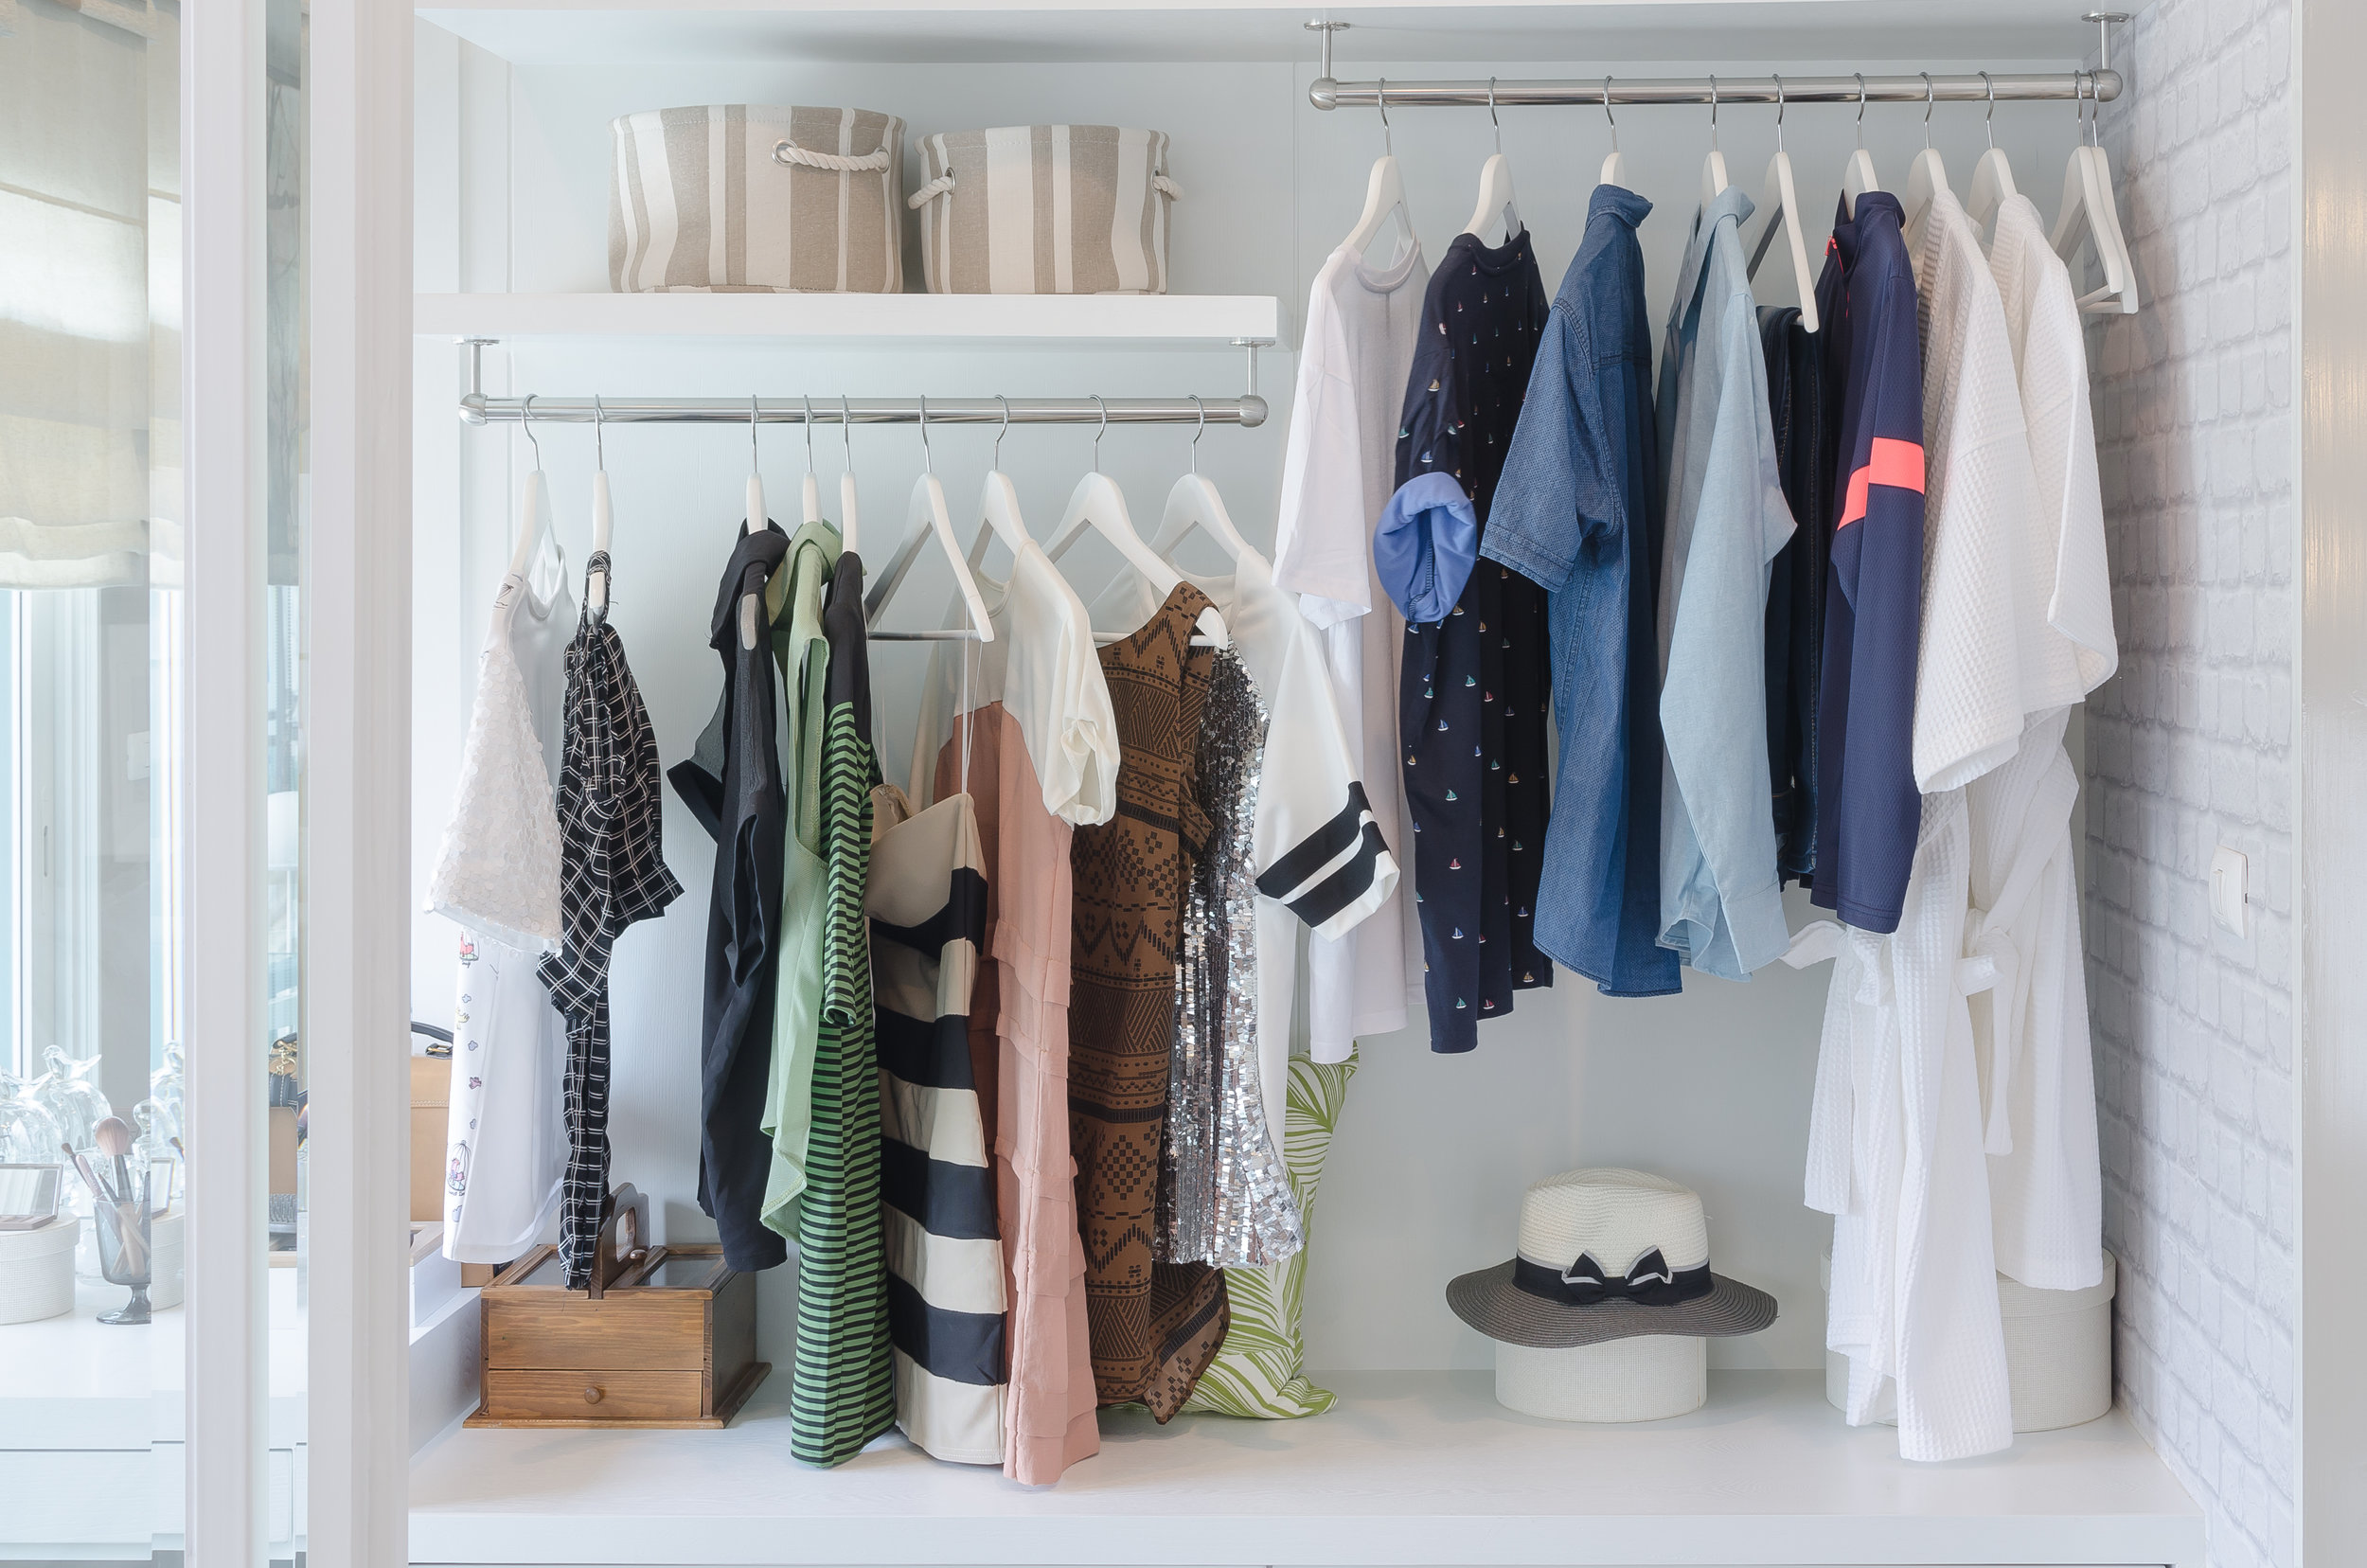 bigstock-Clothes-Hanging-In-Closet-With-111213401.jpg